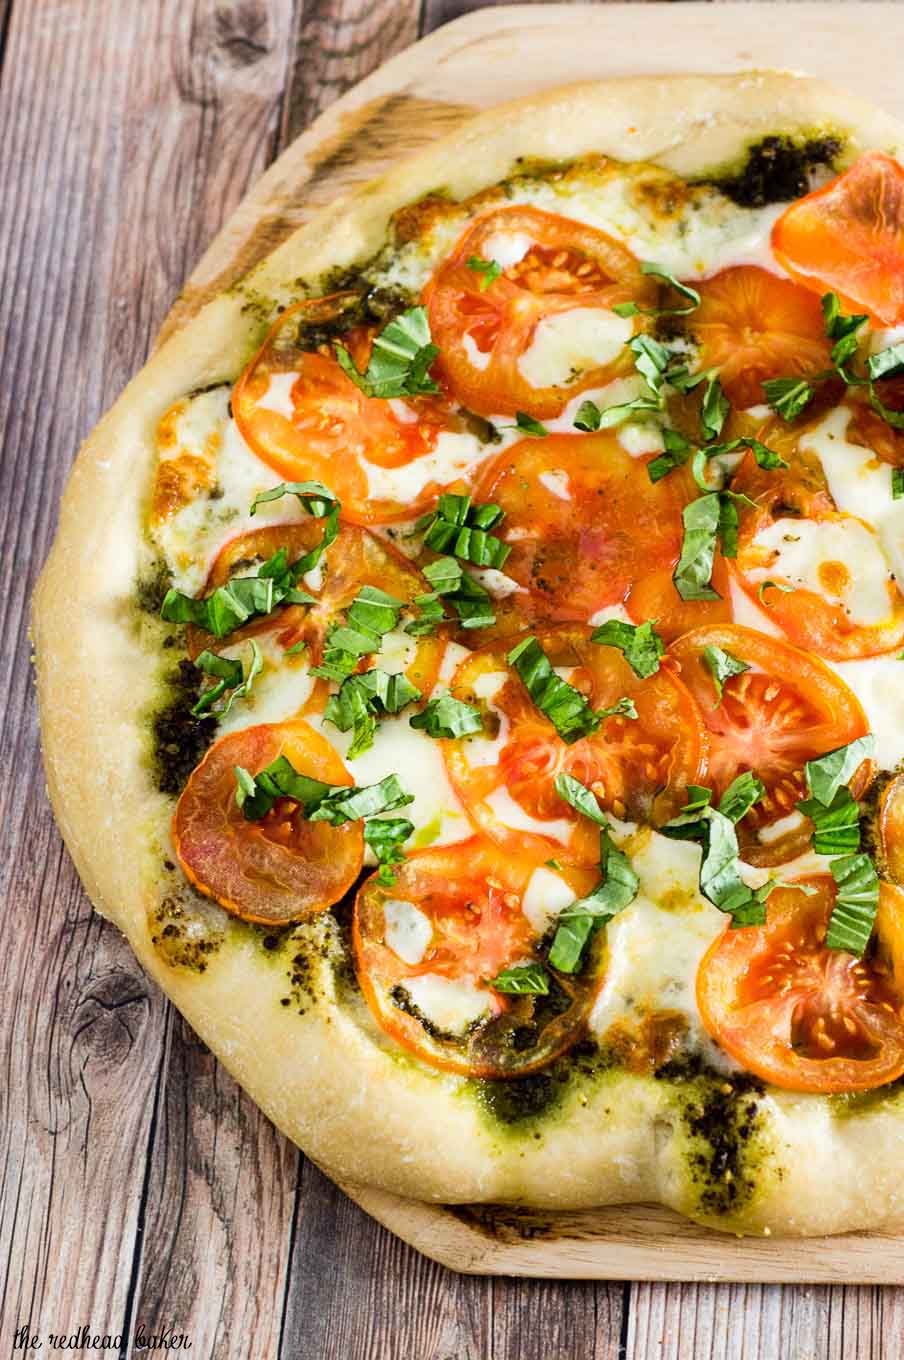 Caprese pizza is topped with pesto, thinly sliced tomatoes, and mozzarella cheese. Fresh basil and a balsamic glaze are added after baking.